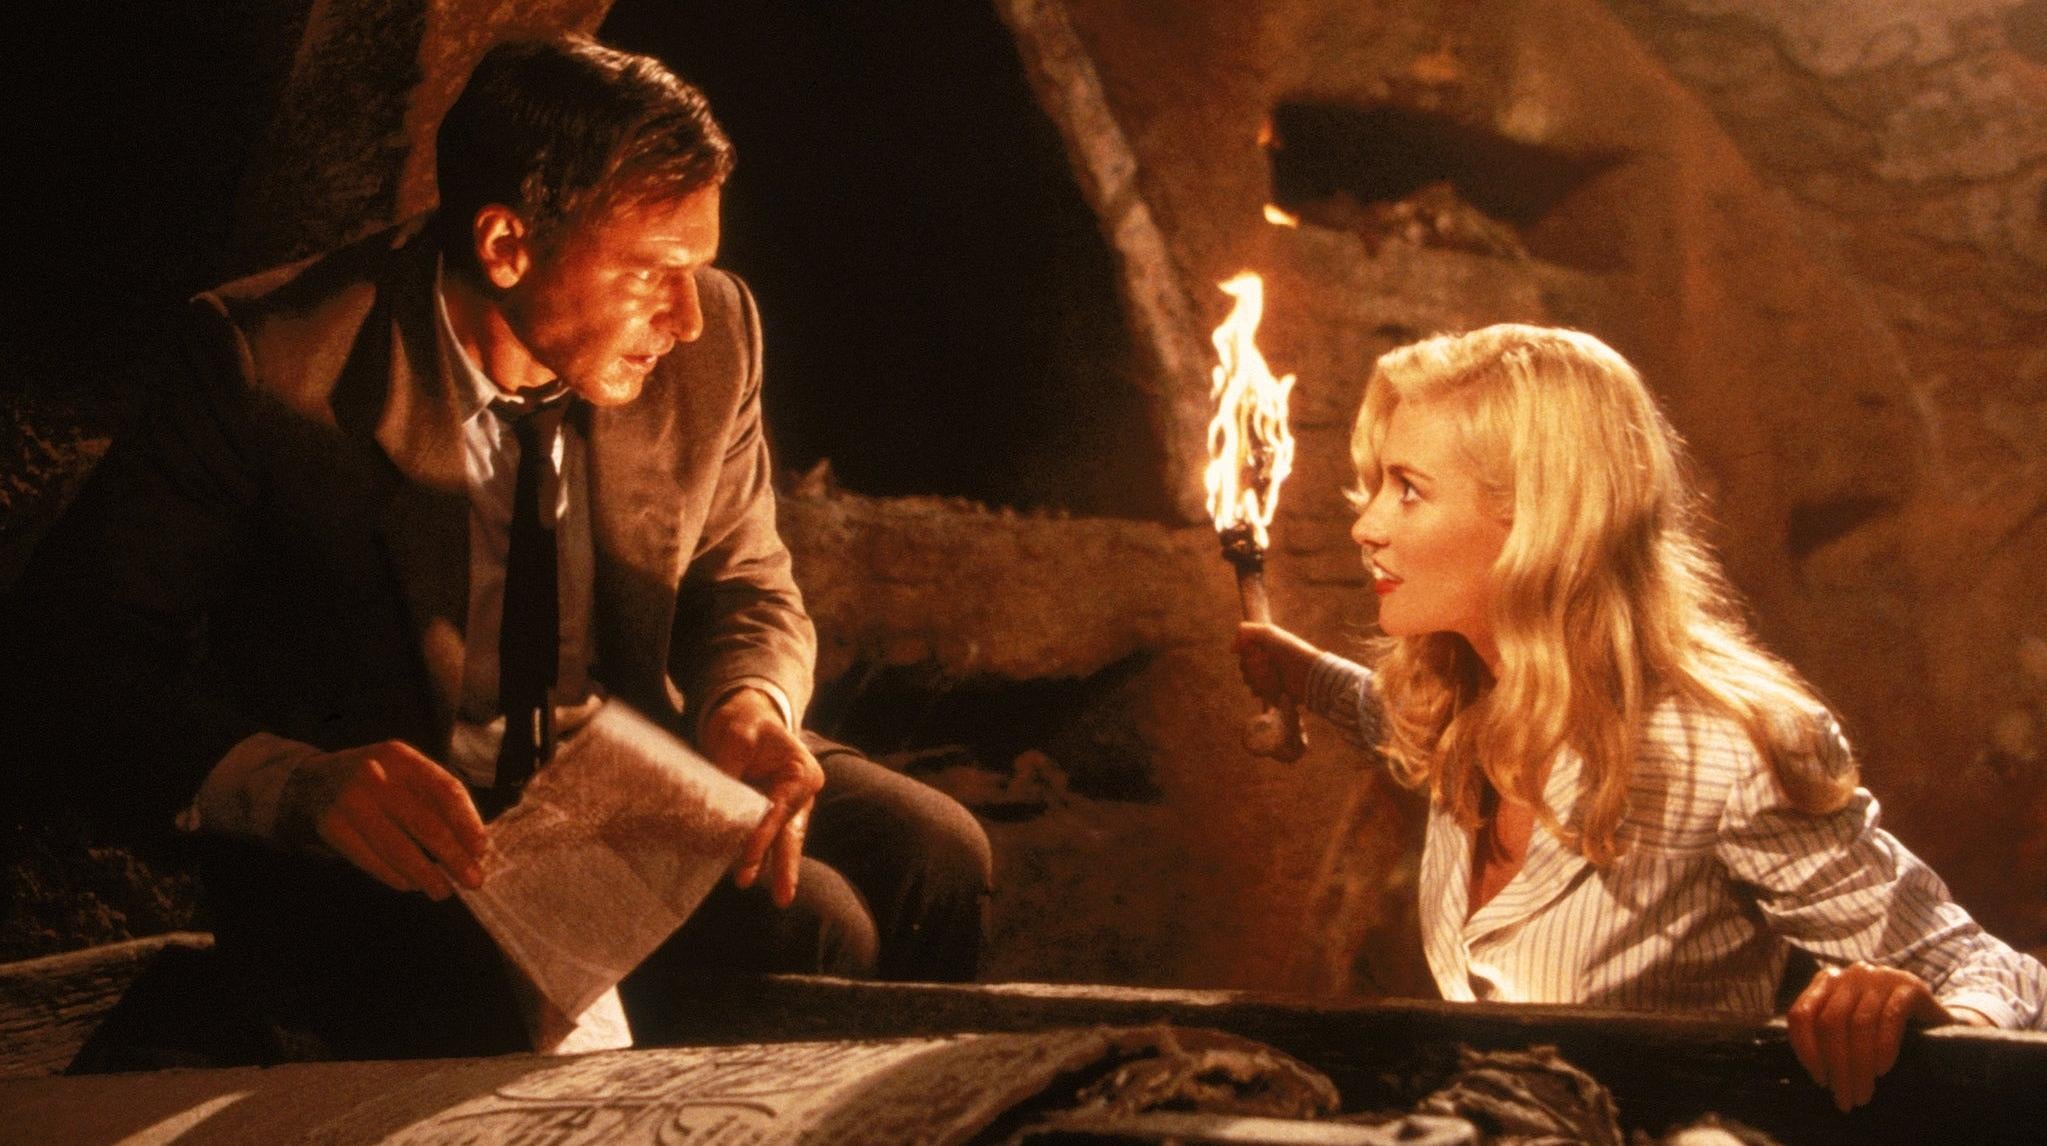 Indy and Elsa in the knight's tomb. (Image: Lucasfilm)